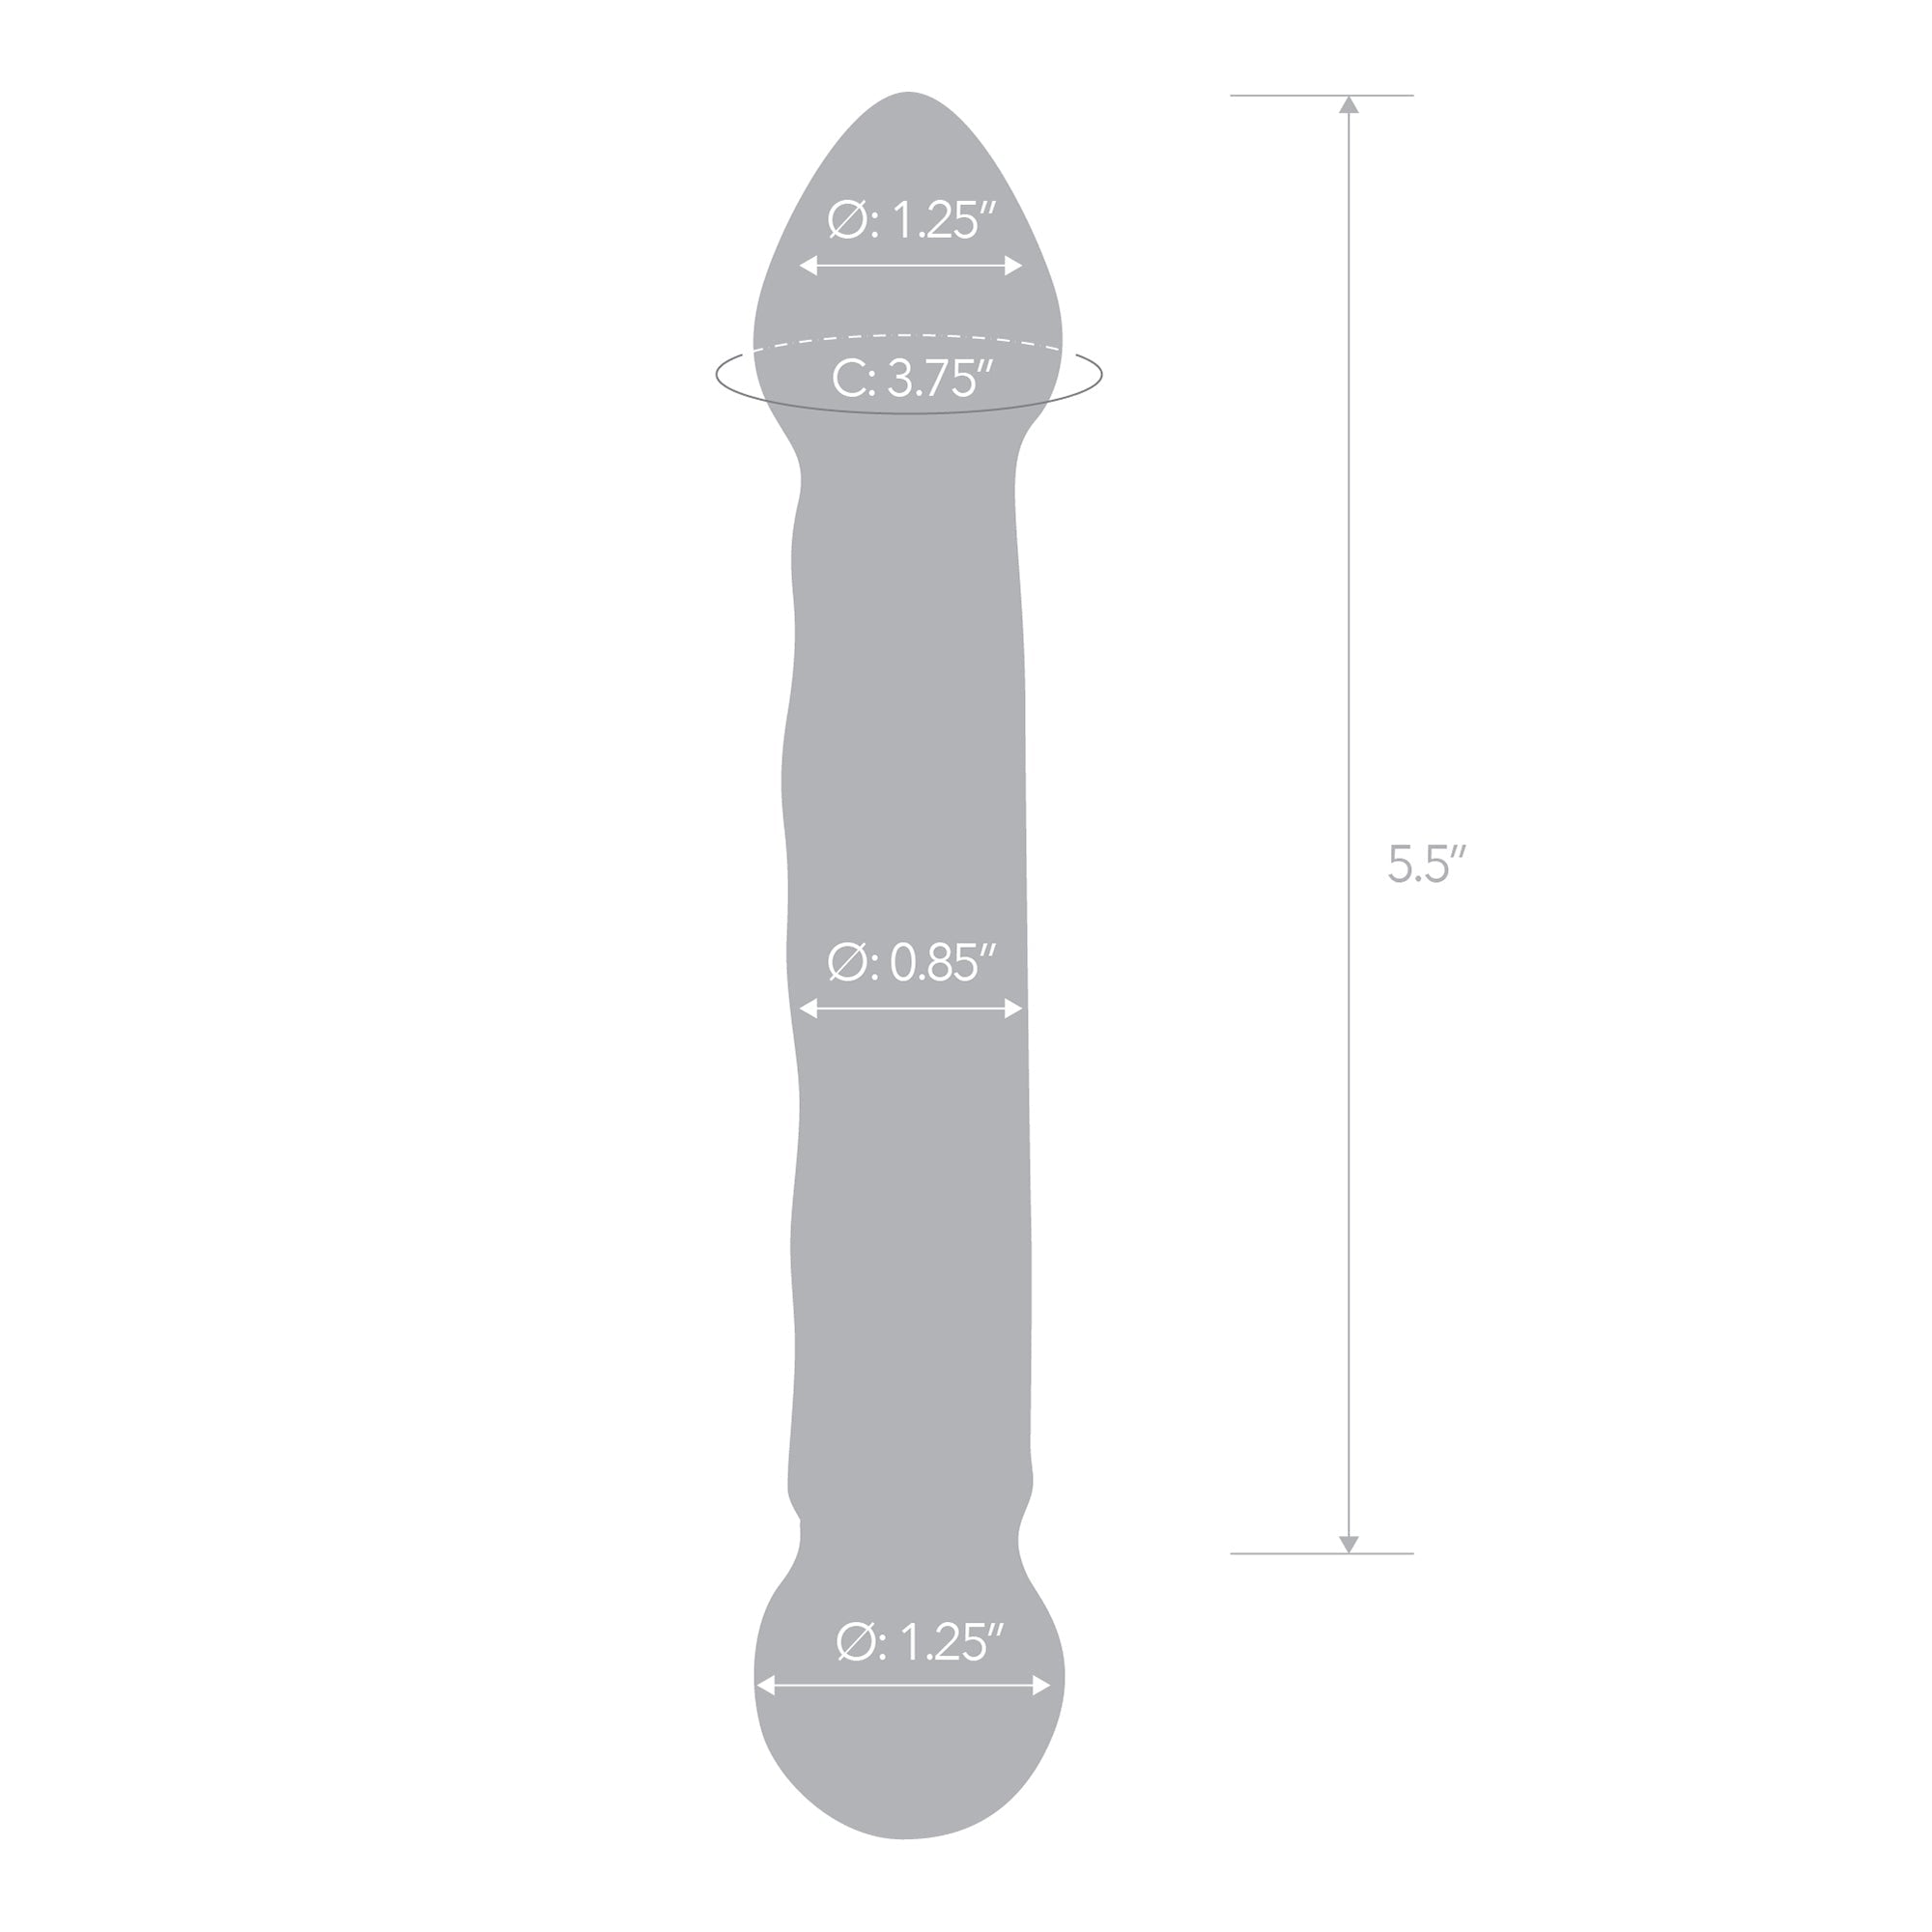 Glas Full Tip Textured Glass Dildo, 6.5 Inches